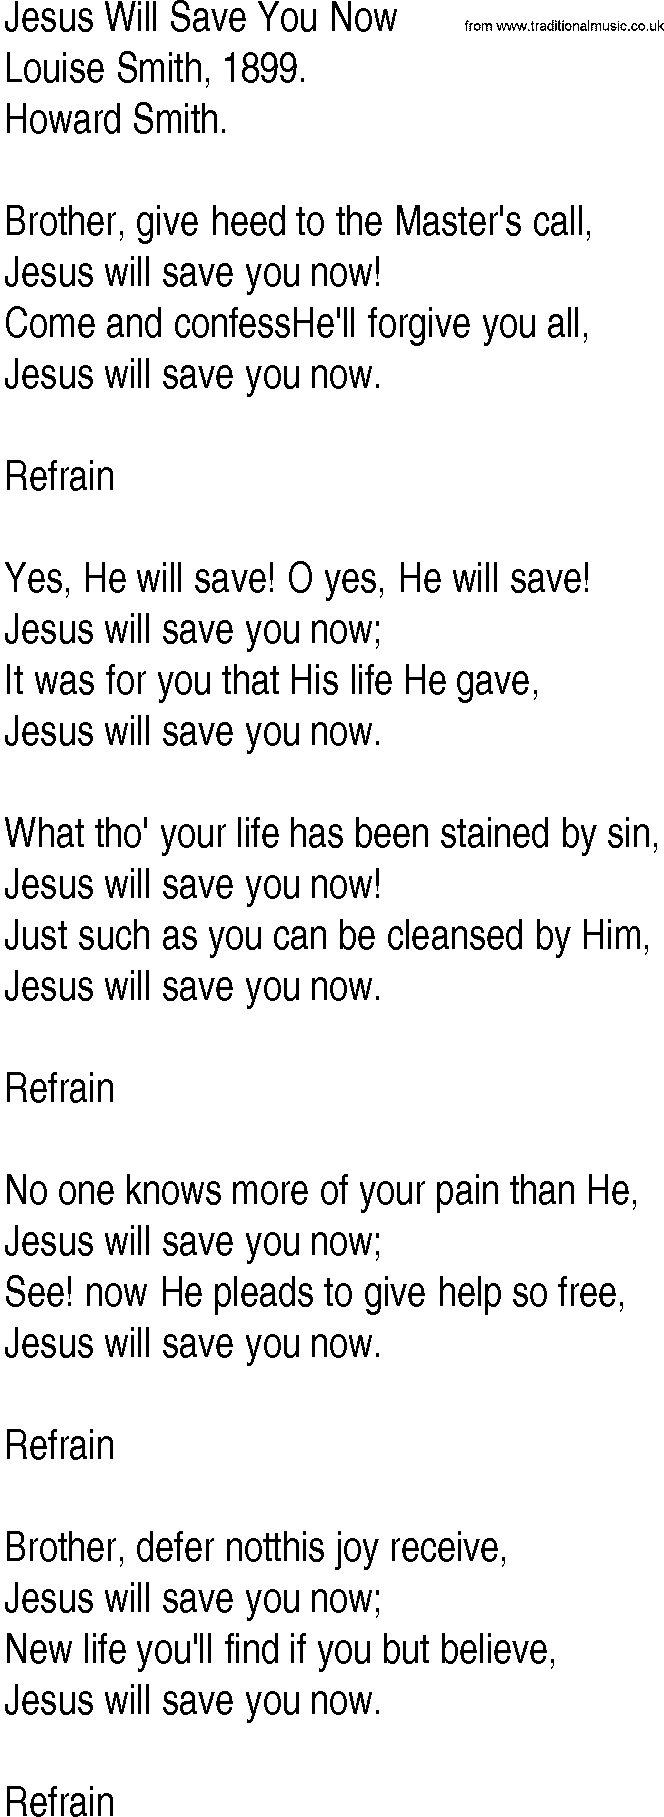 Hymn and Gospel Song: Jesus Will Save You Now by Louise Smith lyrics